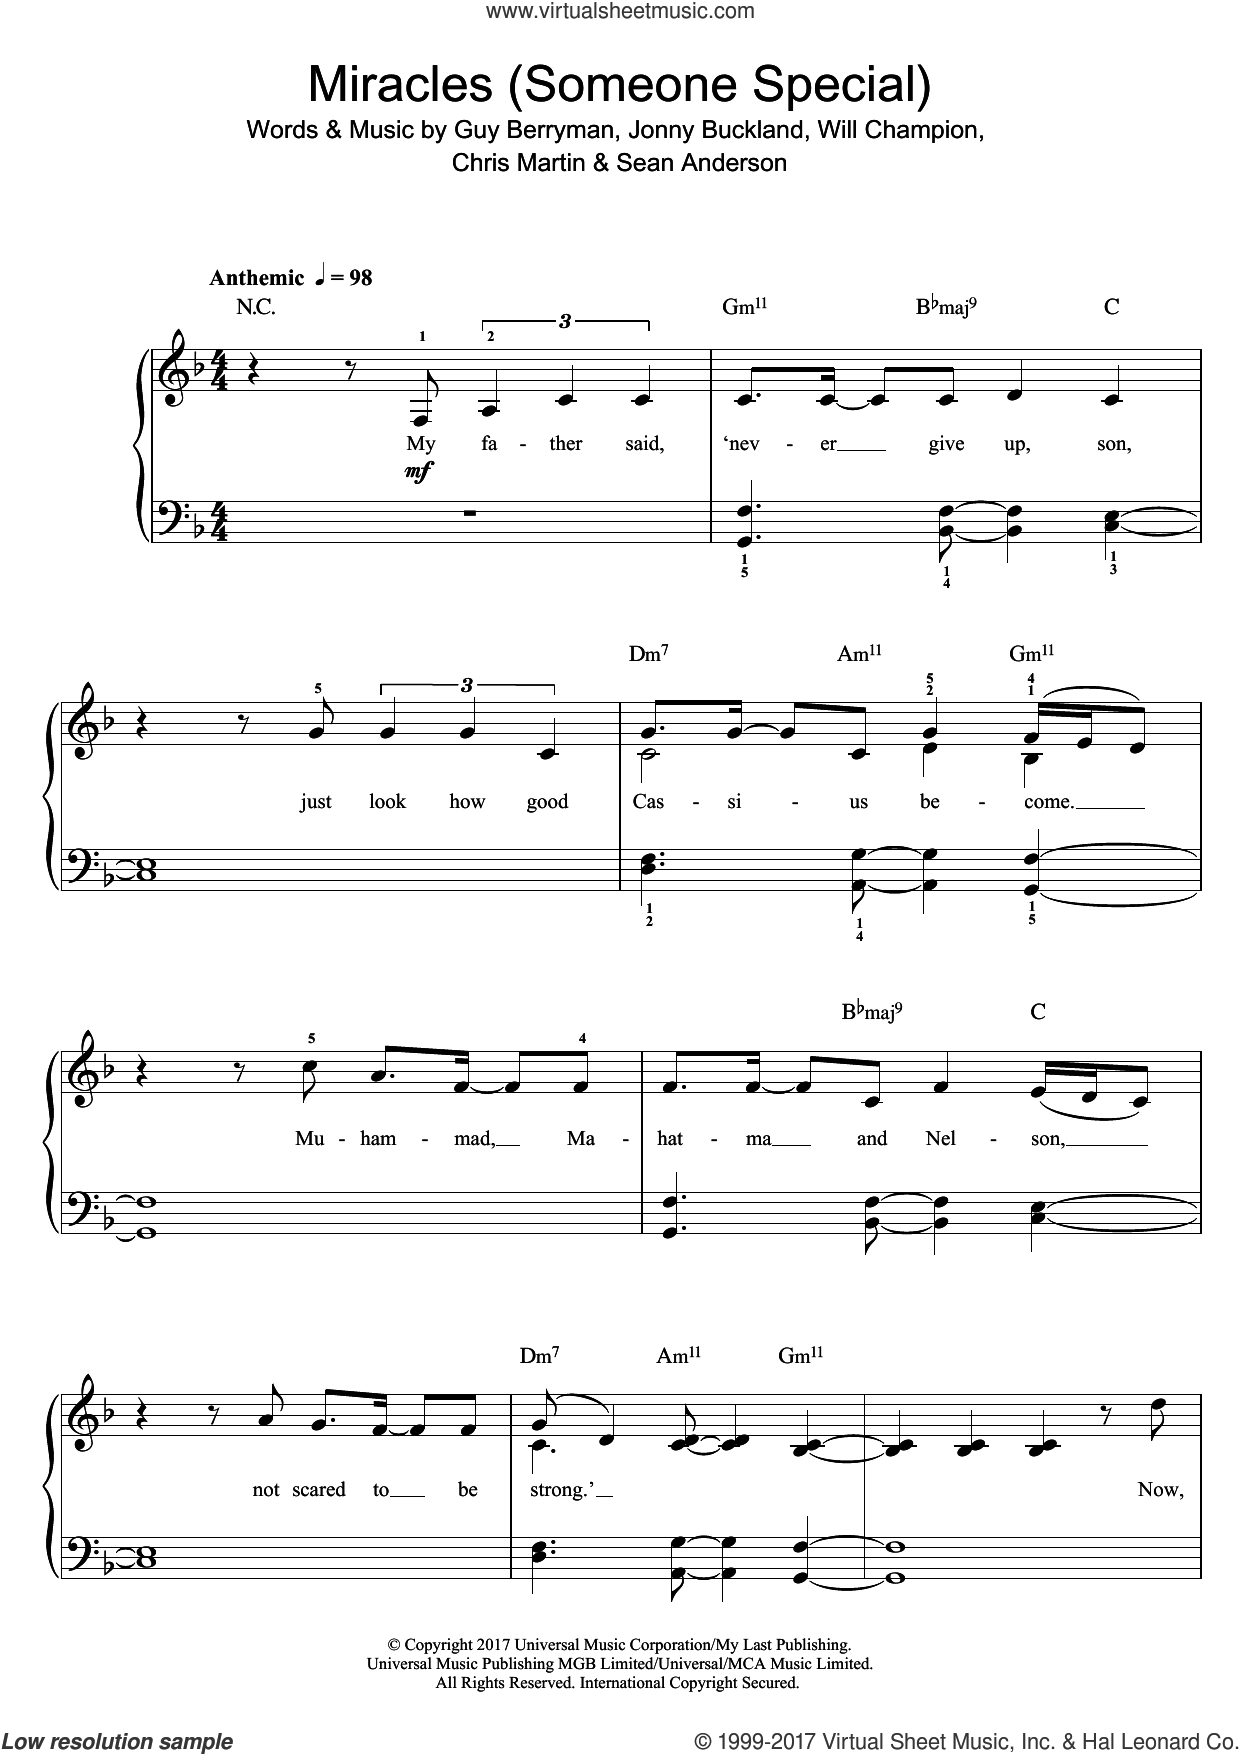 Coldplay - Miracles (Someone Special) (featuring Big Sean) sheet music